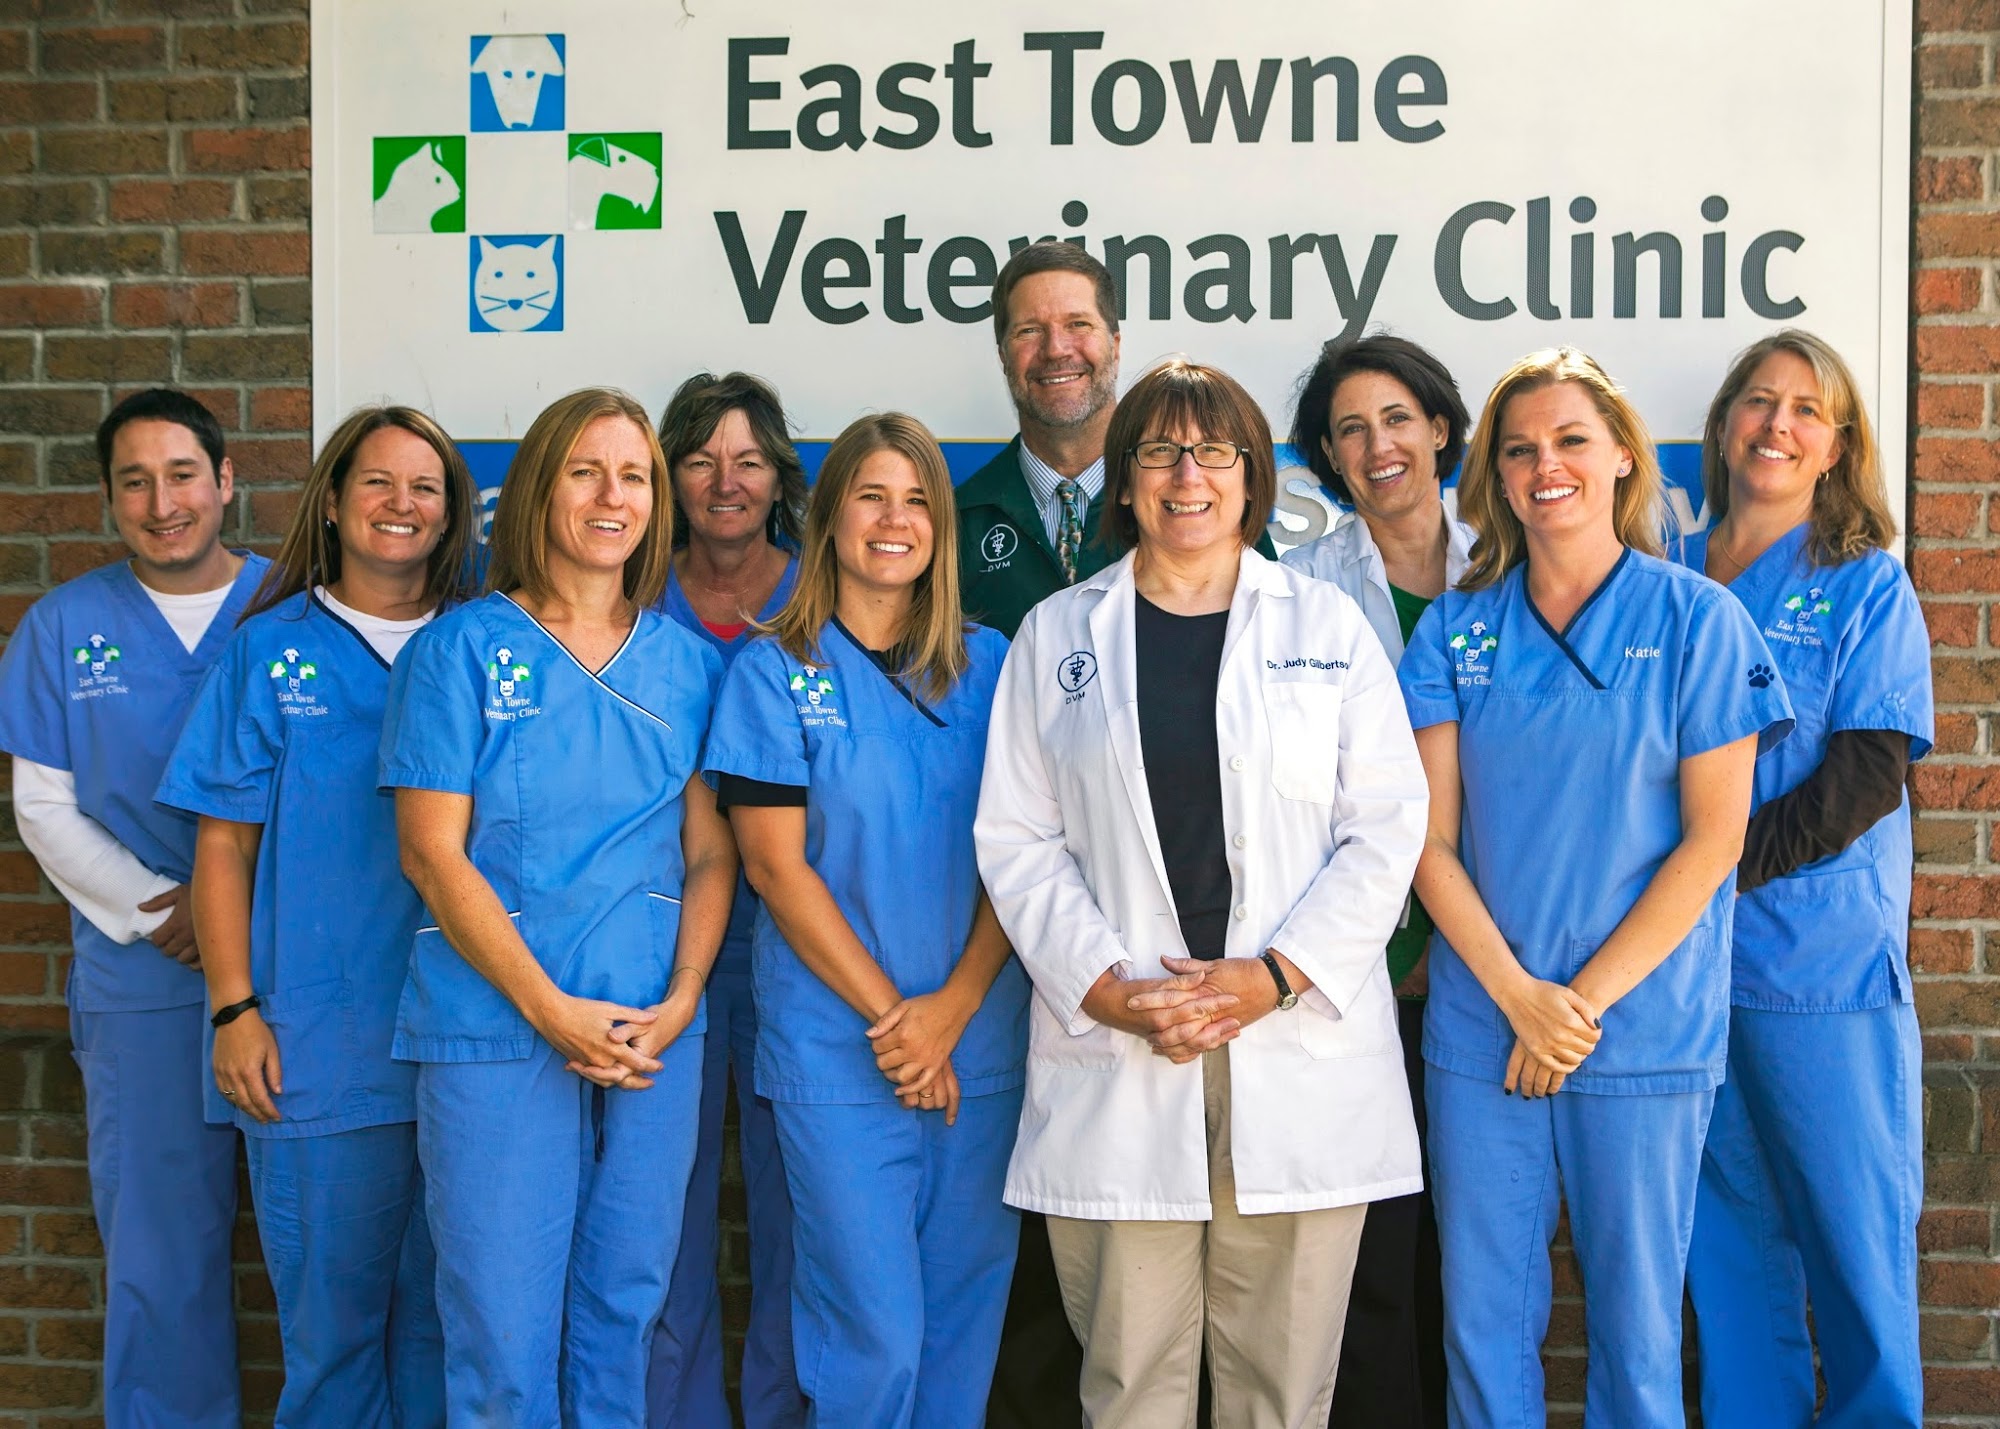 East Towne Veterinary Clinic